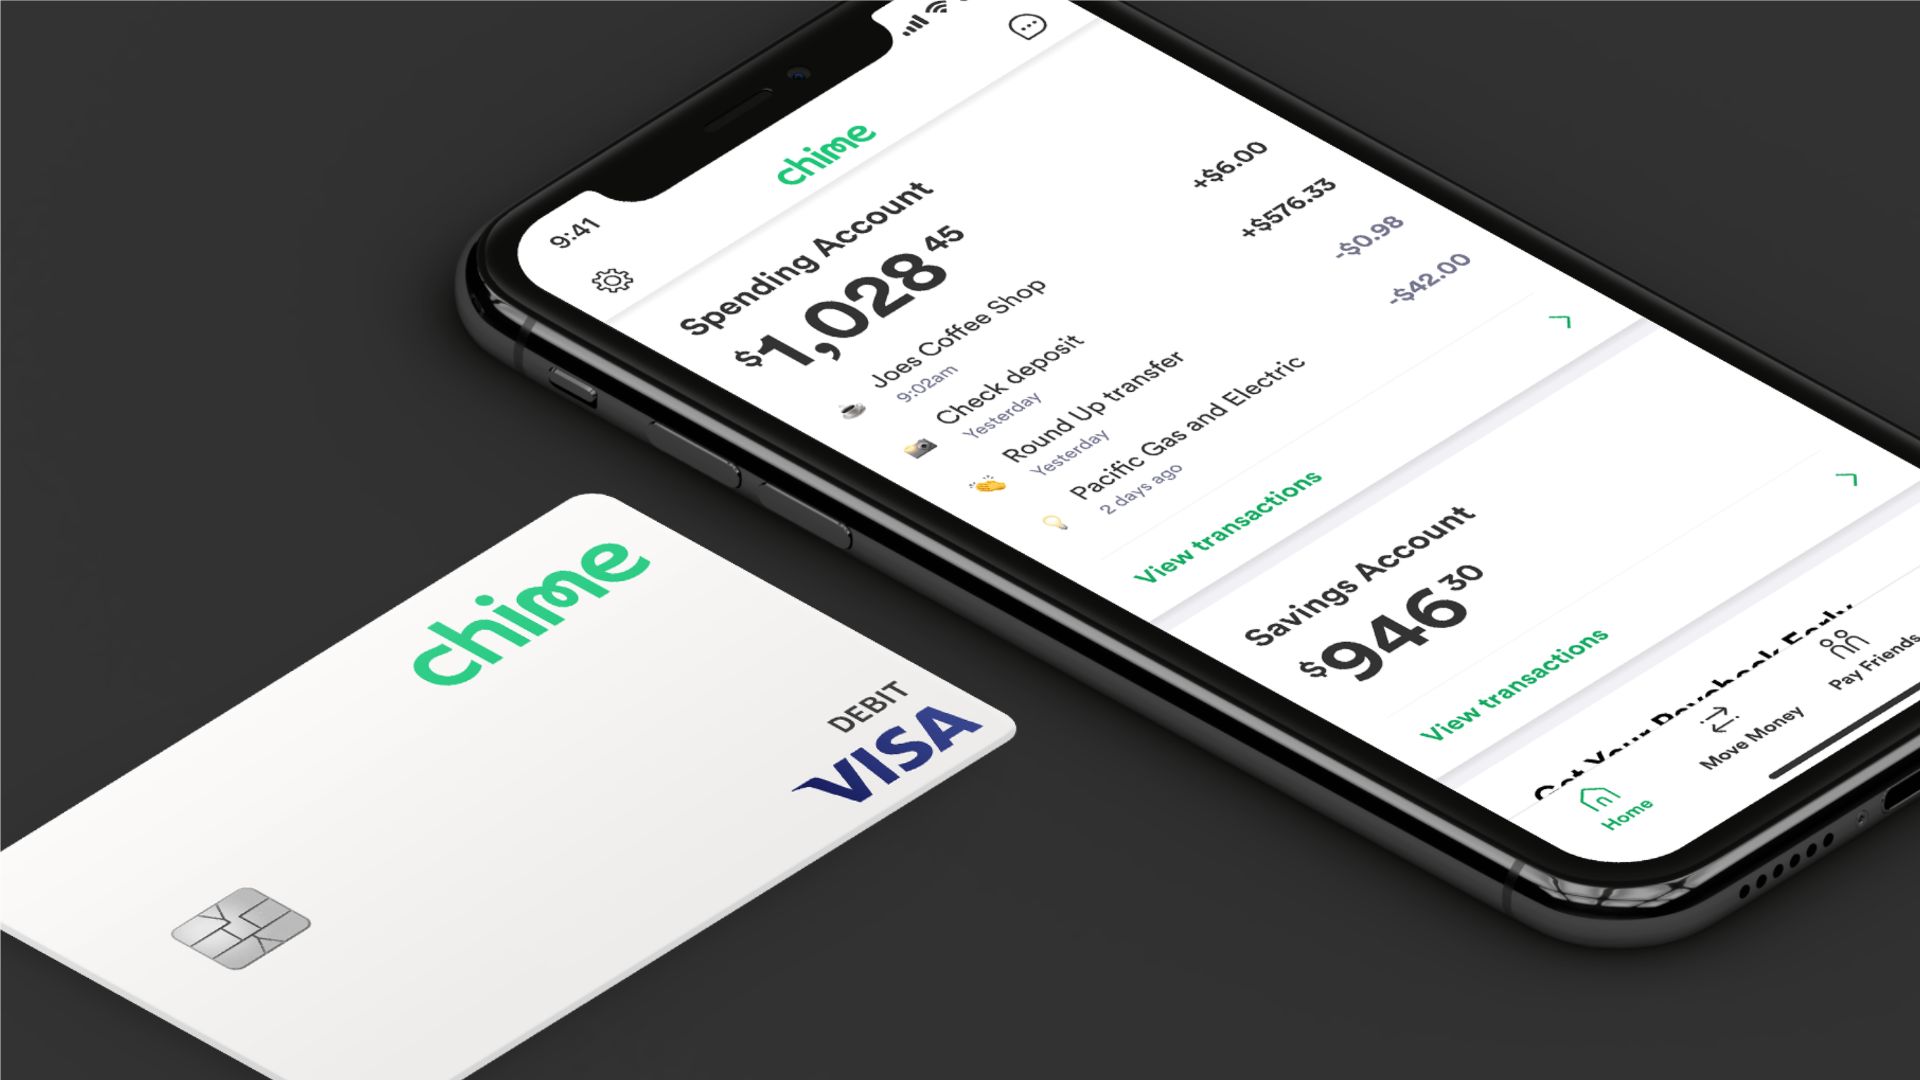 How To Deposit Cash To Chime Card